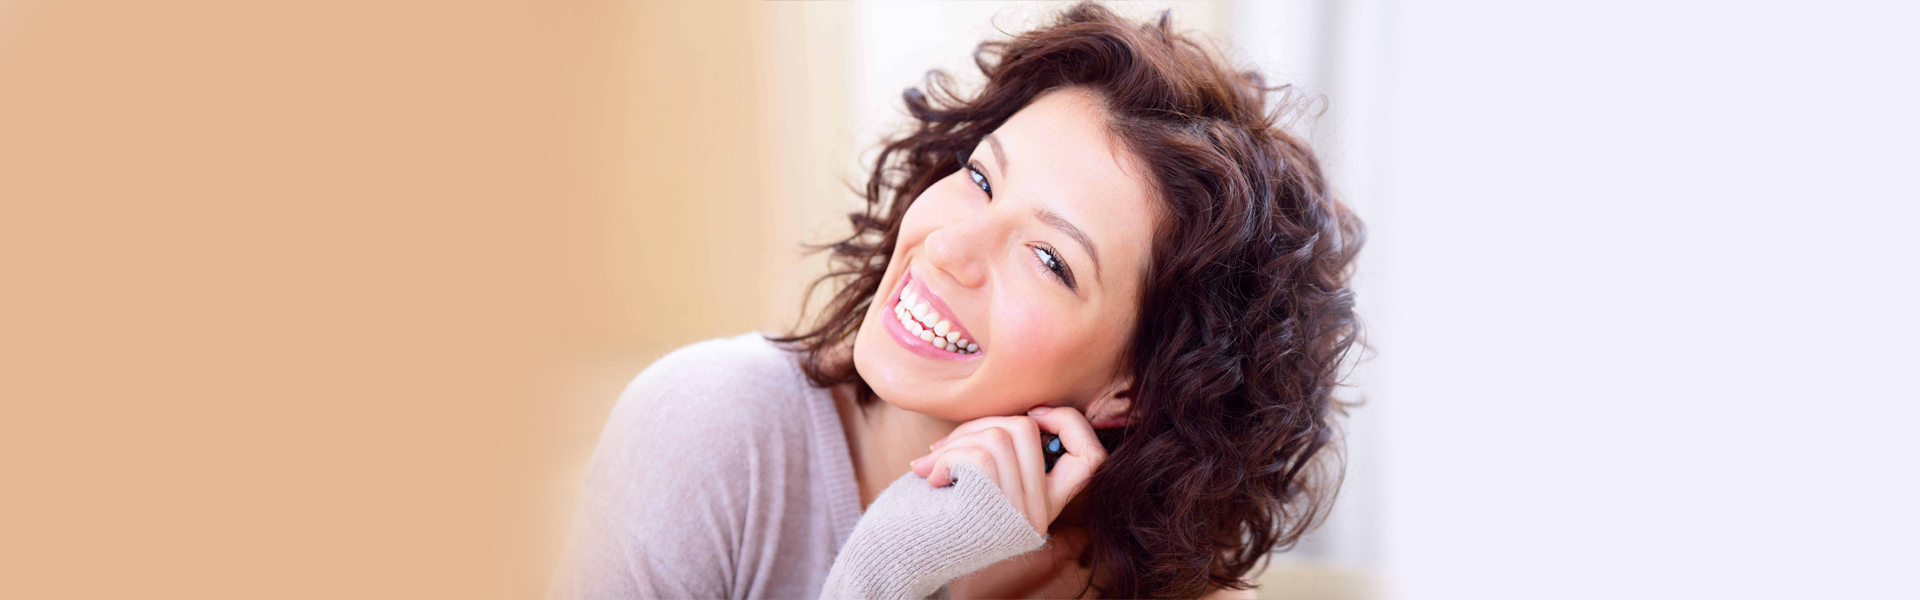 Smile Makeover : Treatment, Recovery, and Aftercare